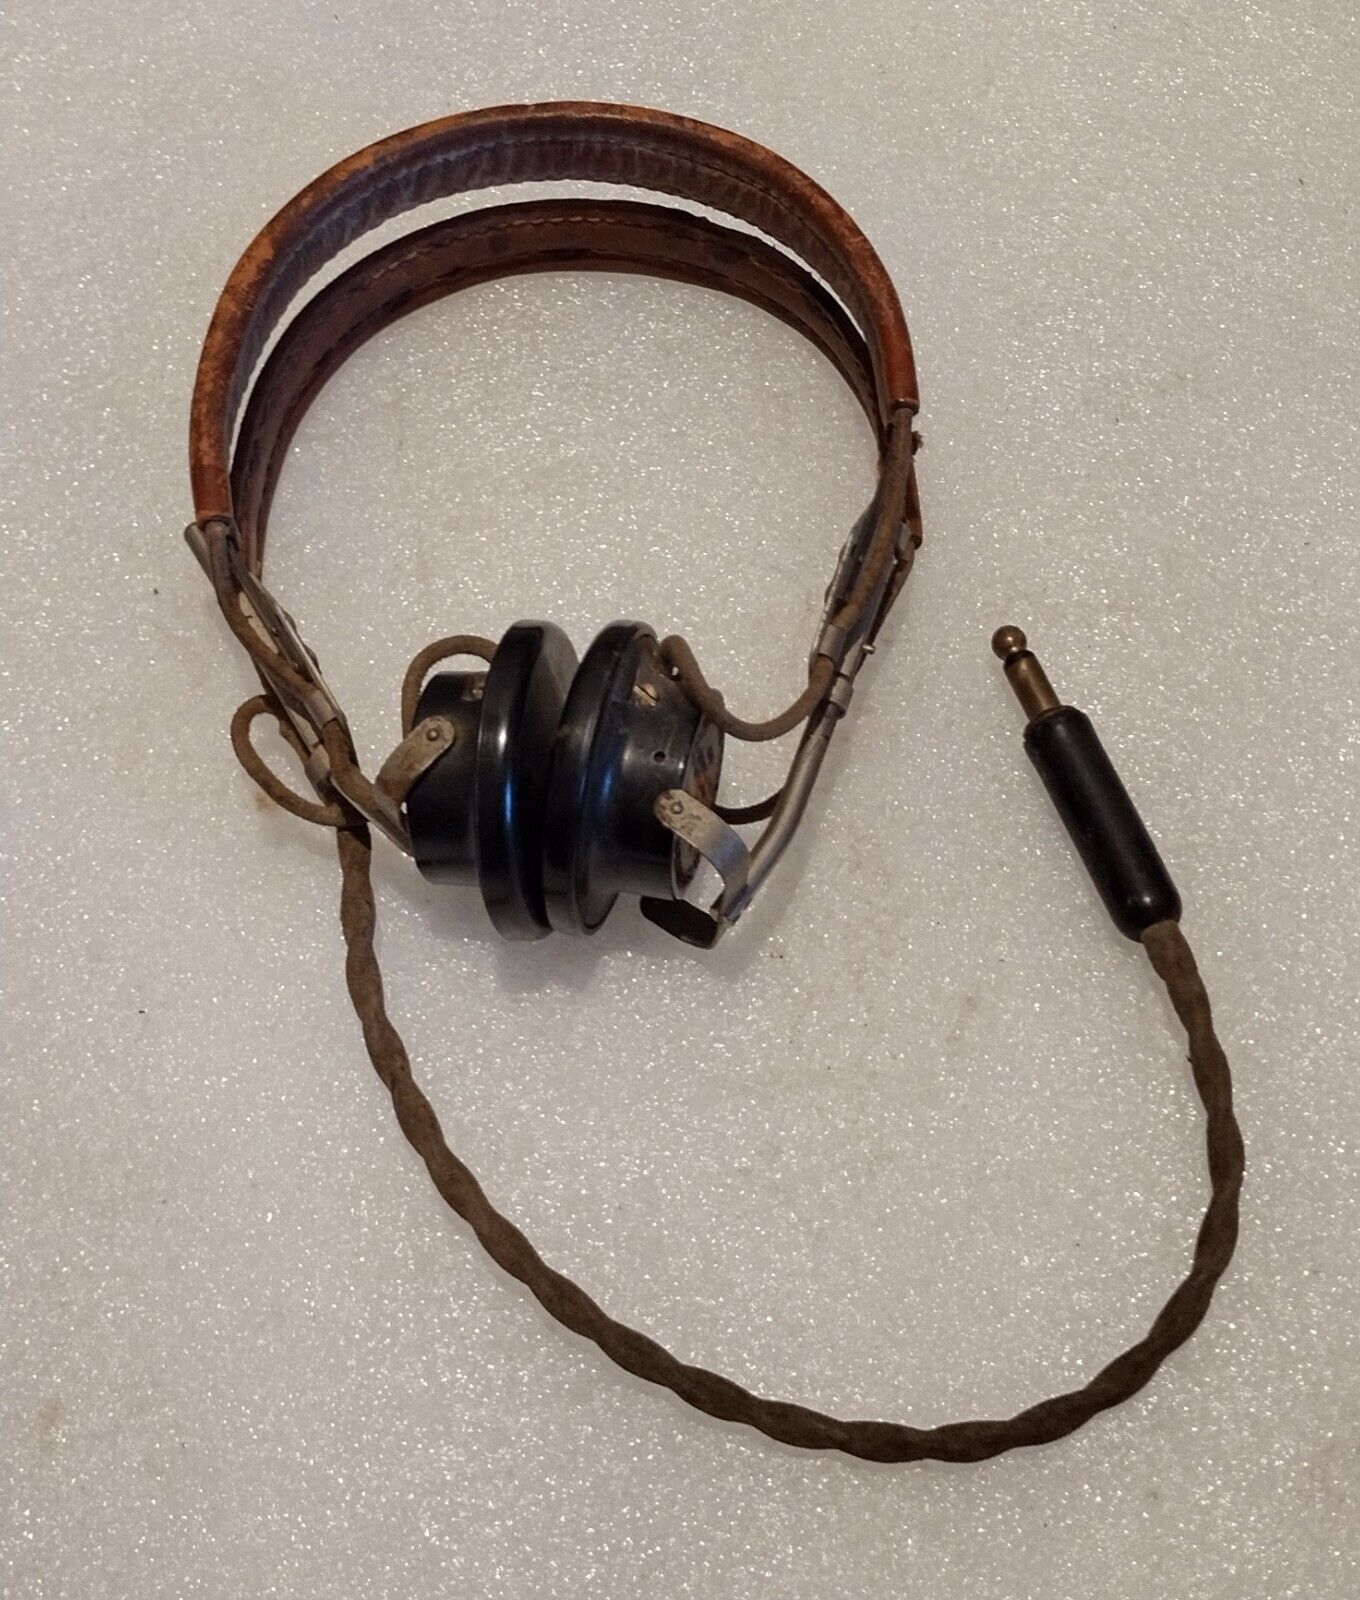 Vintage 1940s WW2 Headset HB-7 US Army Signal Corps R-14 Receivers Headphones